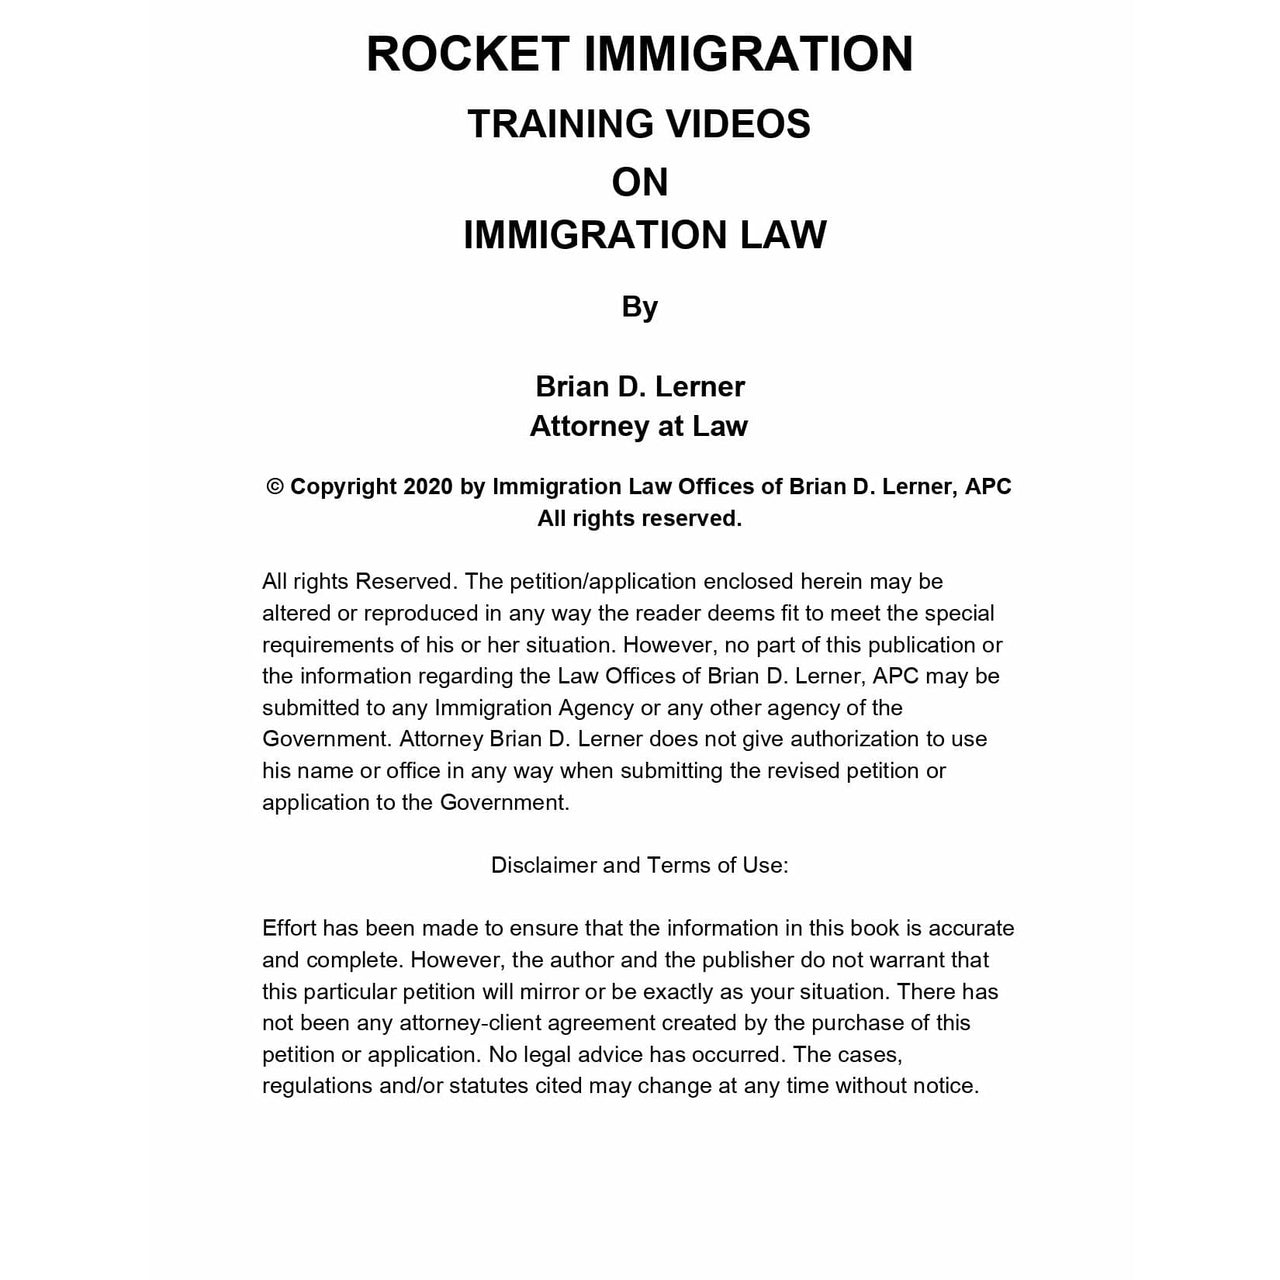 K-1 Fiancee Petition Visa Training Course Access Packet - Rocket Immigration Petitions